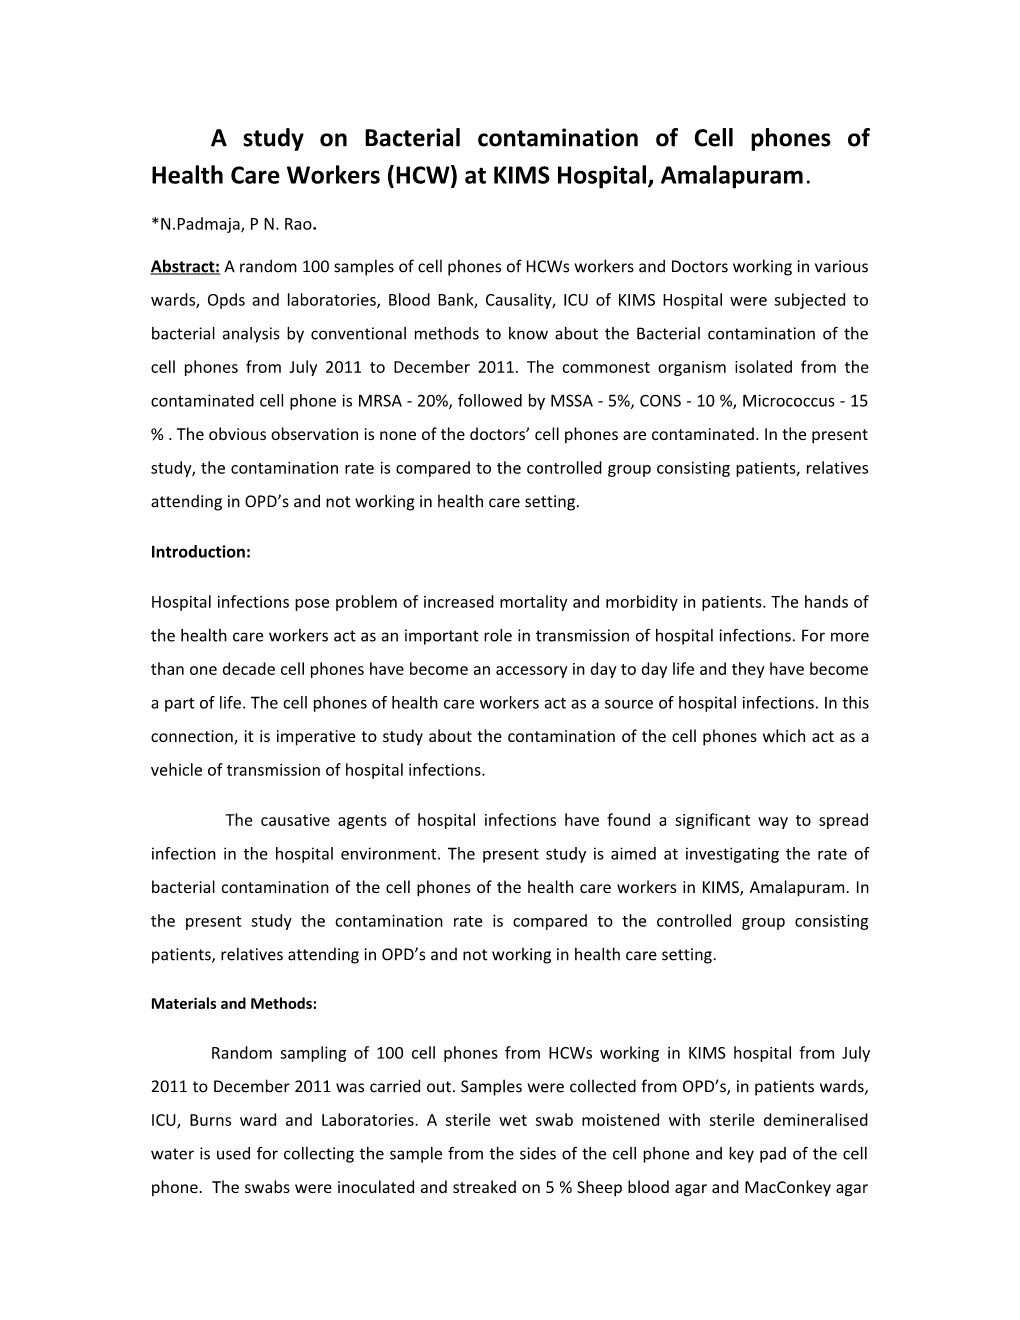 A Study on Bacterial Contamination of Cell Phones of Health Care Workers (HCW) at KIMS